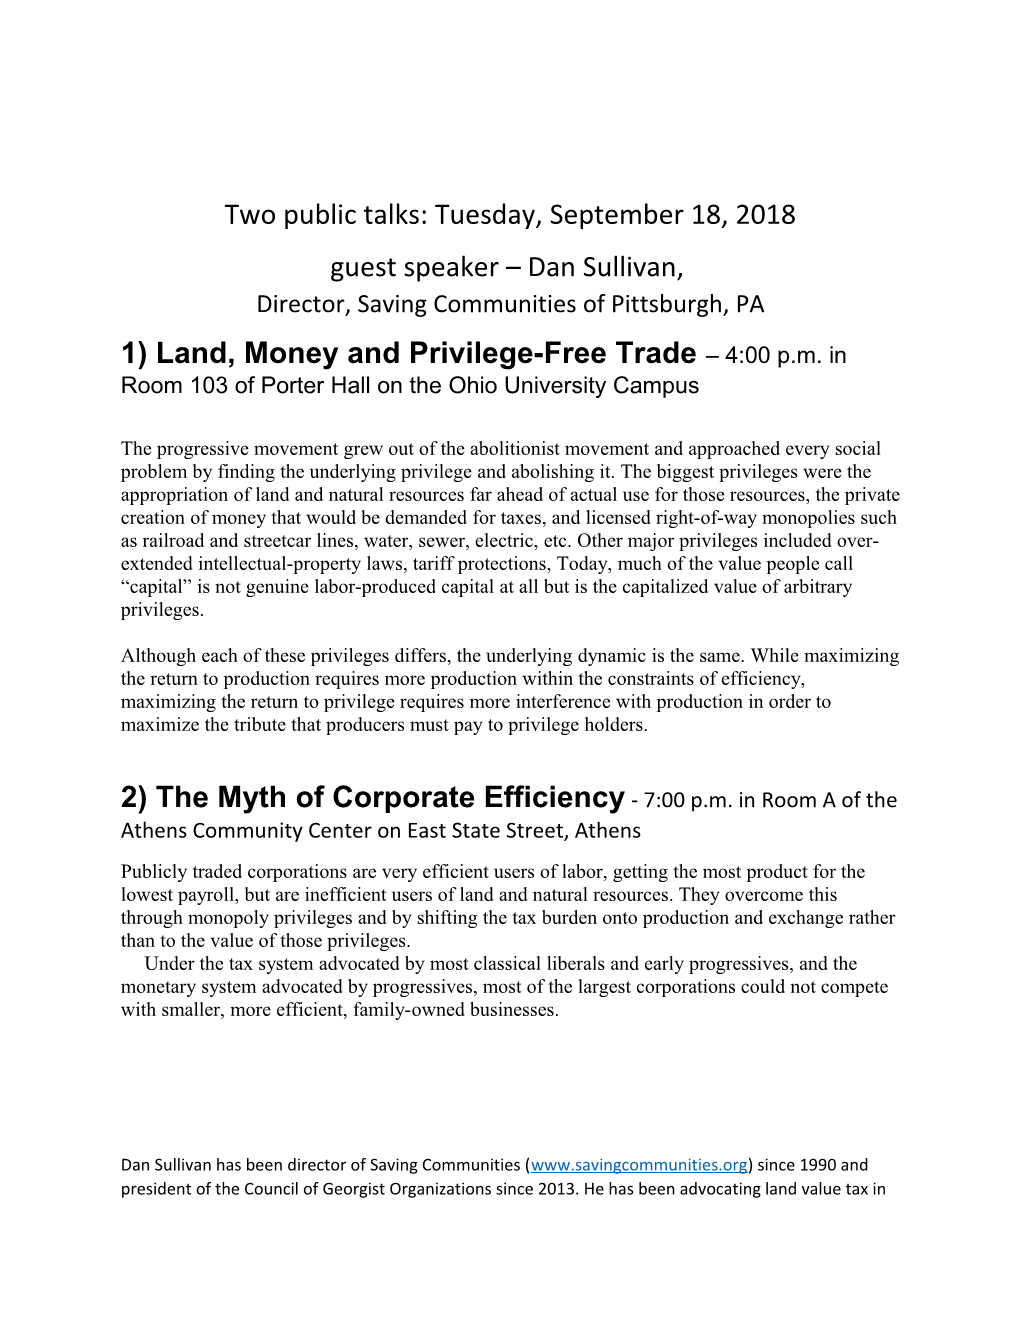 Two Public Talks: Tuesday, September 18, 2018